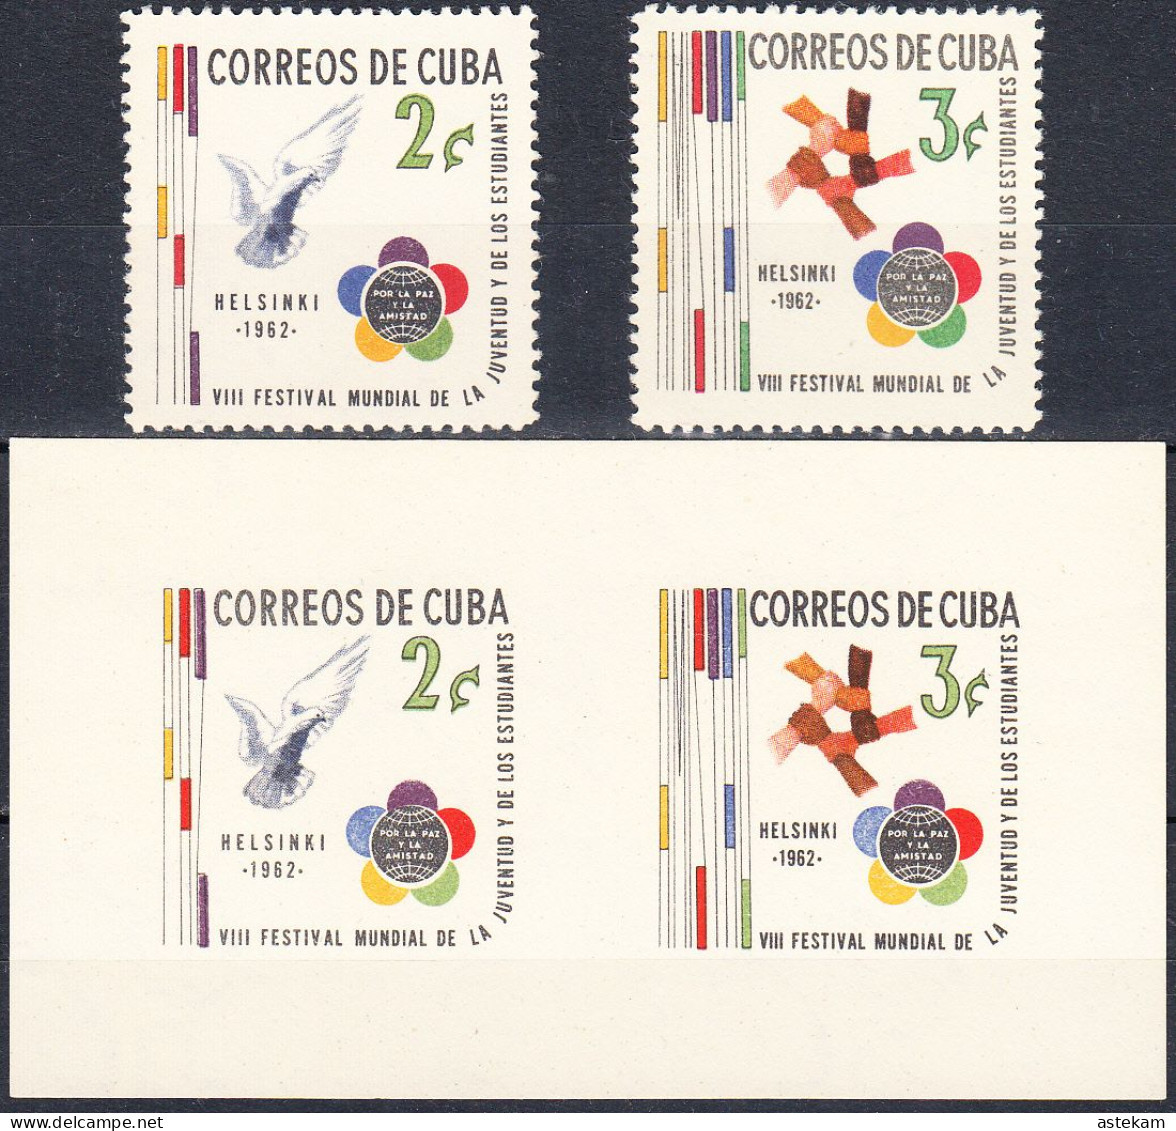 CUBA 1962, 8th WORLD FESTIVAL Of YOUTH And STUDENTS In HELSINKI, COMPLETE MNH SERIES+BLOCK With GOOD QUALITY,*** - Unused Stamps